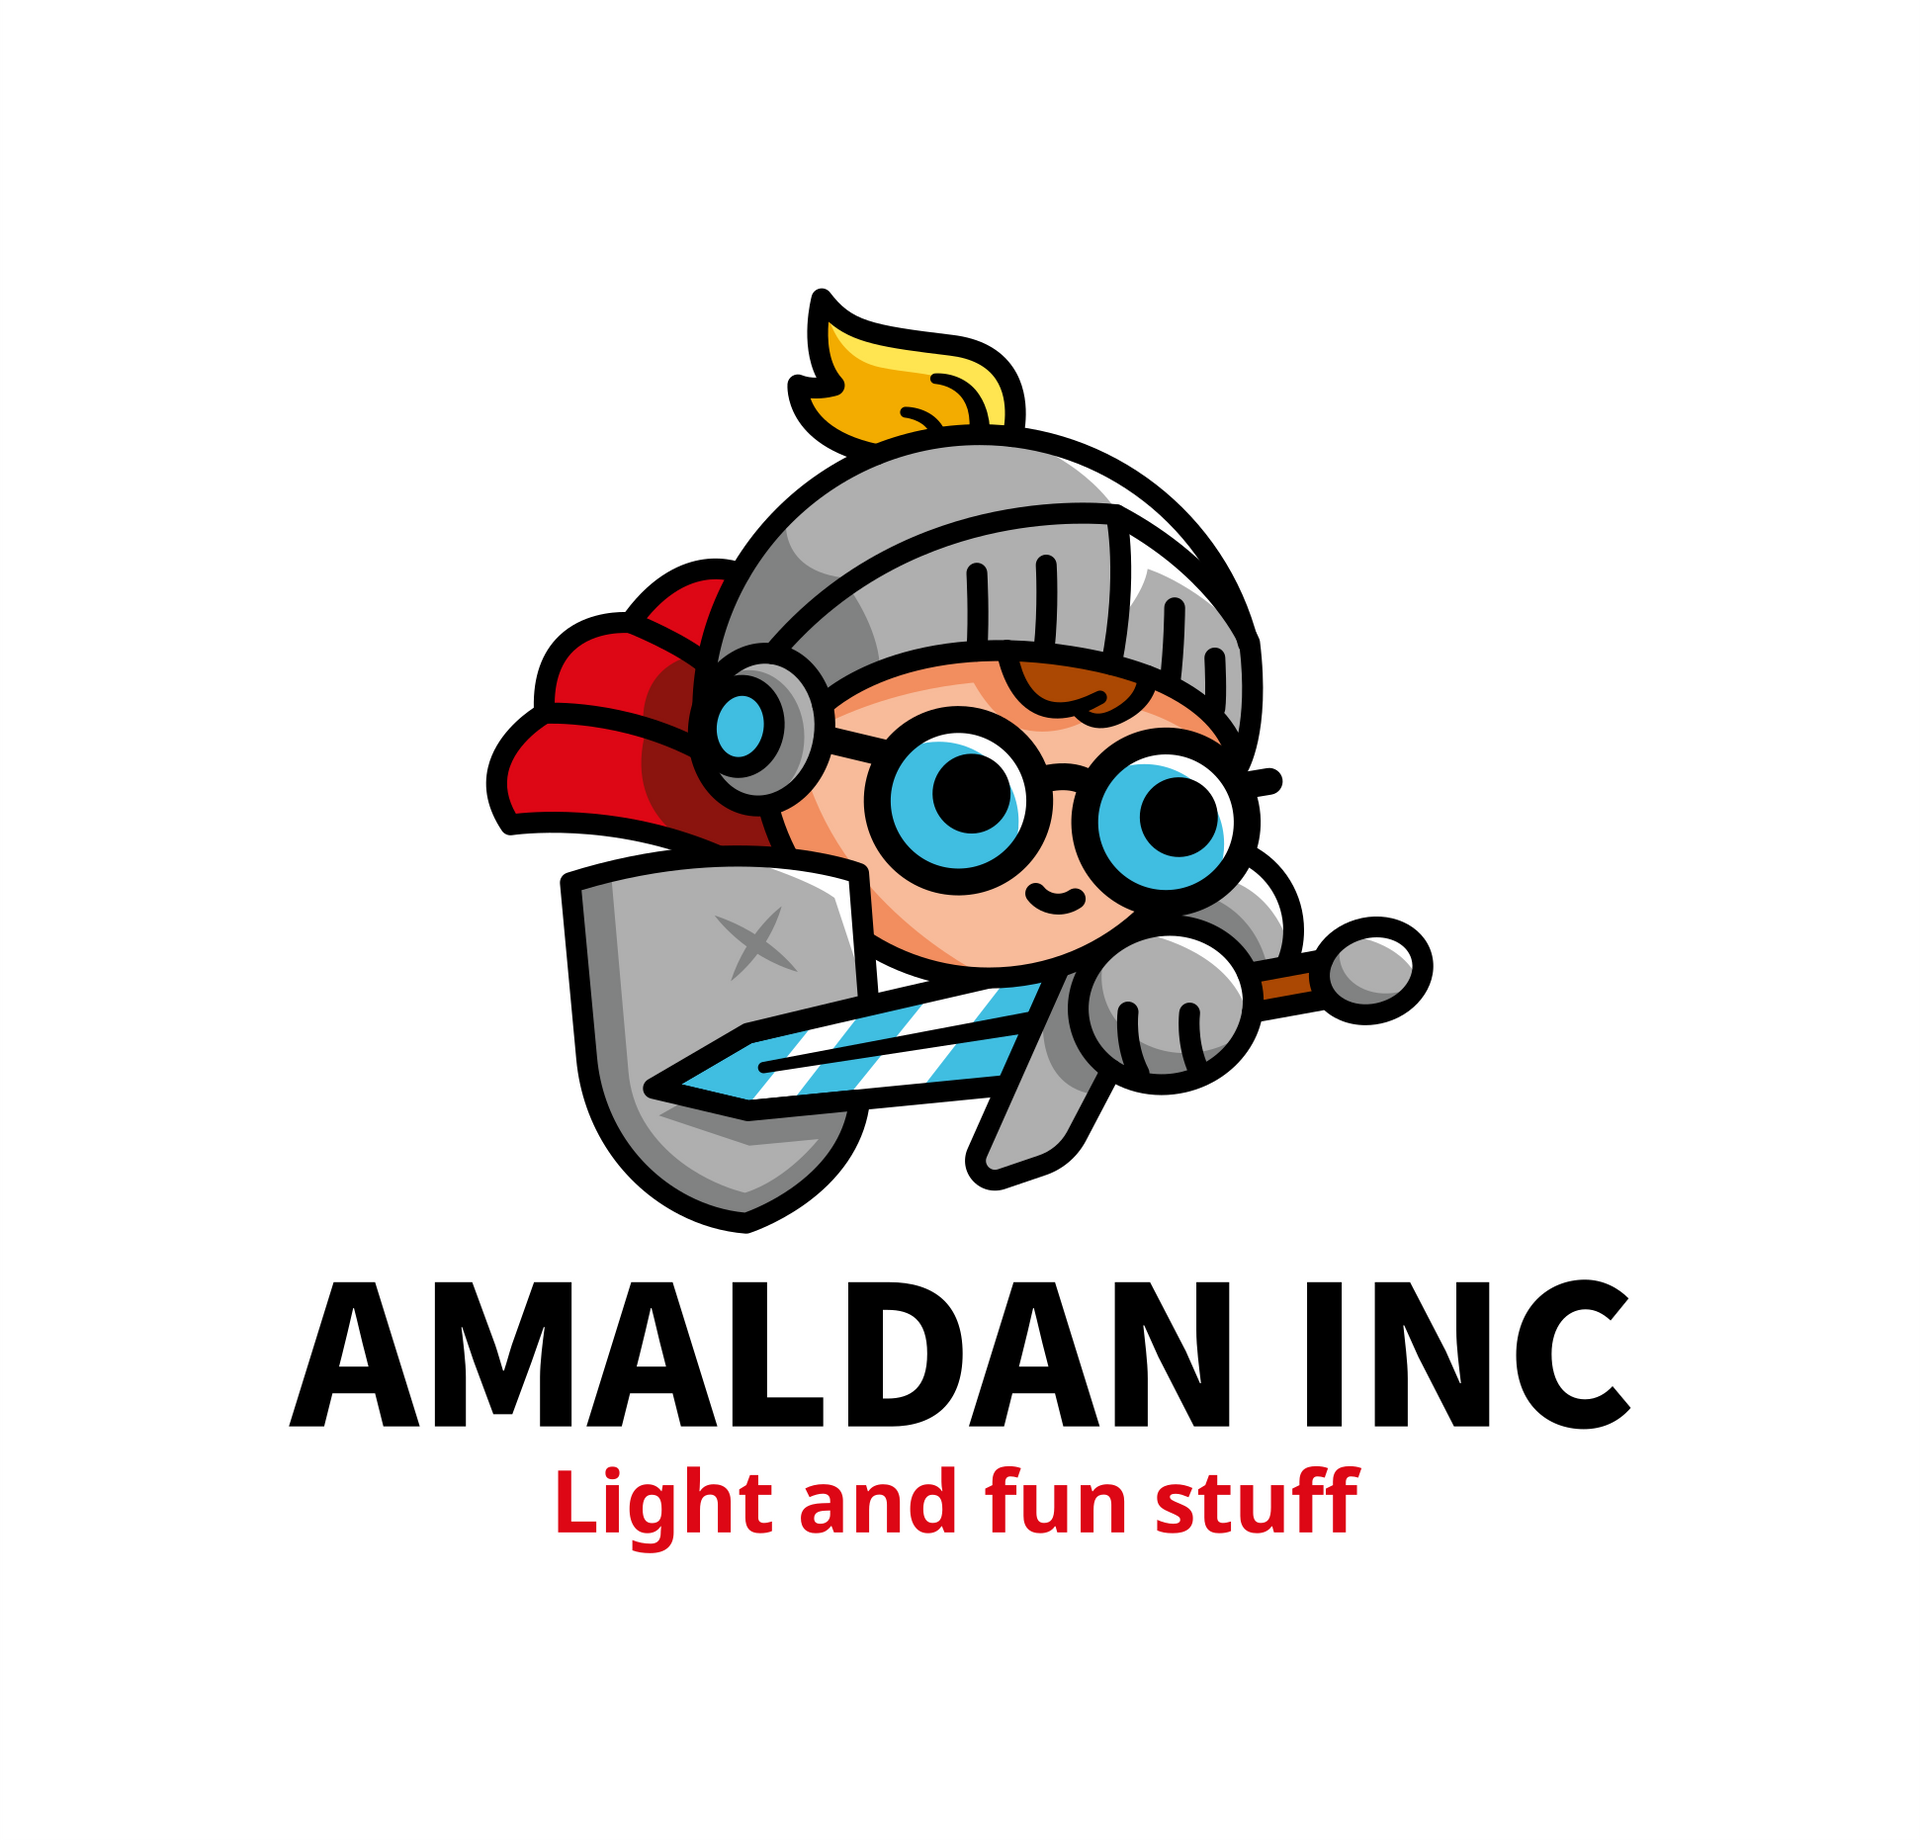 Load video: This short video explains the beginnings of Amaldan Inc. We wanted to create something that would reach out to people who believe in Light in life and fun in life AND purpose in life. 50% of the profit flows to serving people.